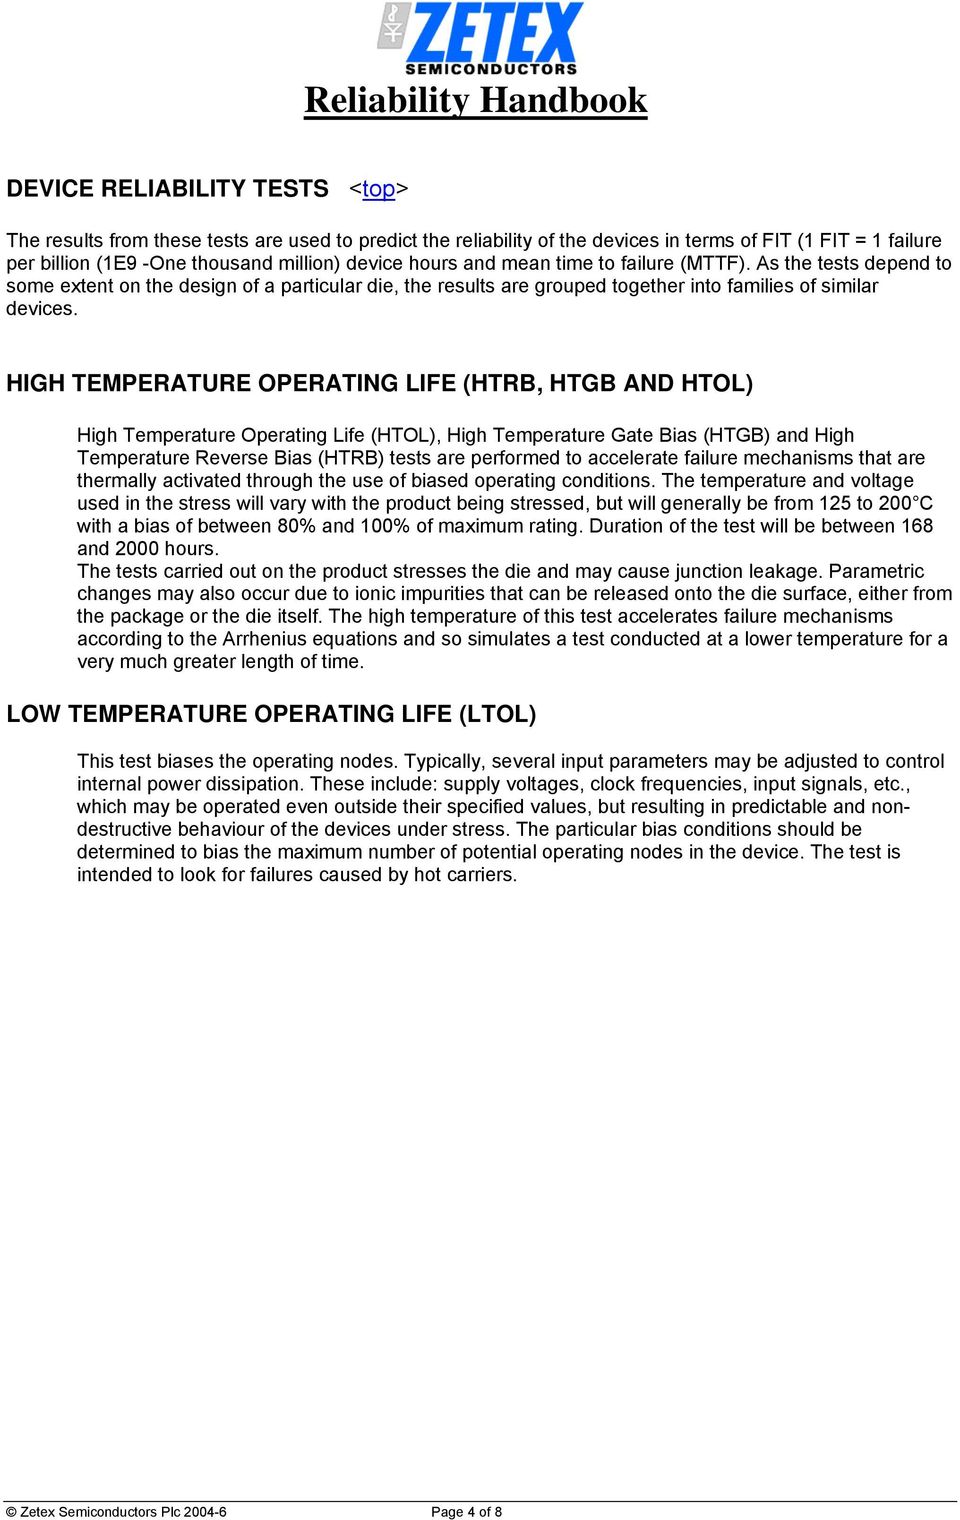 HIGH TEMPERATURE OPERATING LIFE (HTRB, HTGB AND HTOL) High Temperature Operating Life (HTOL), High Temperature Gate Bias (HTGB) and High Temperature Reverse Bias (HTRB) tests are performed to